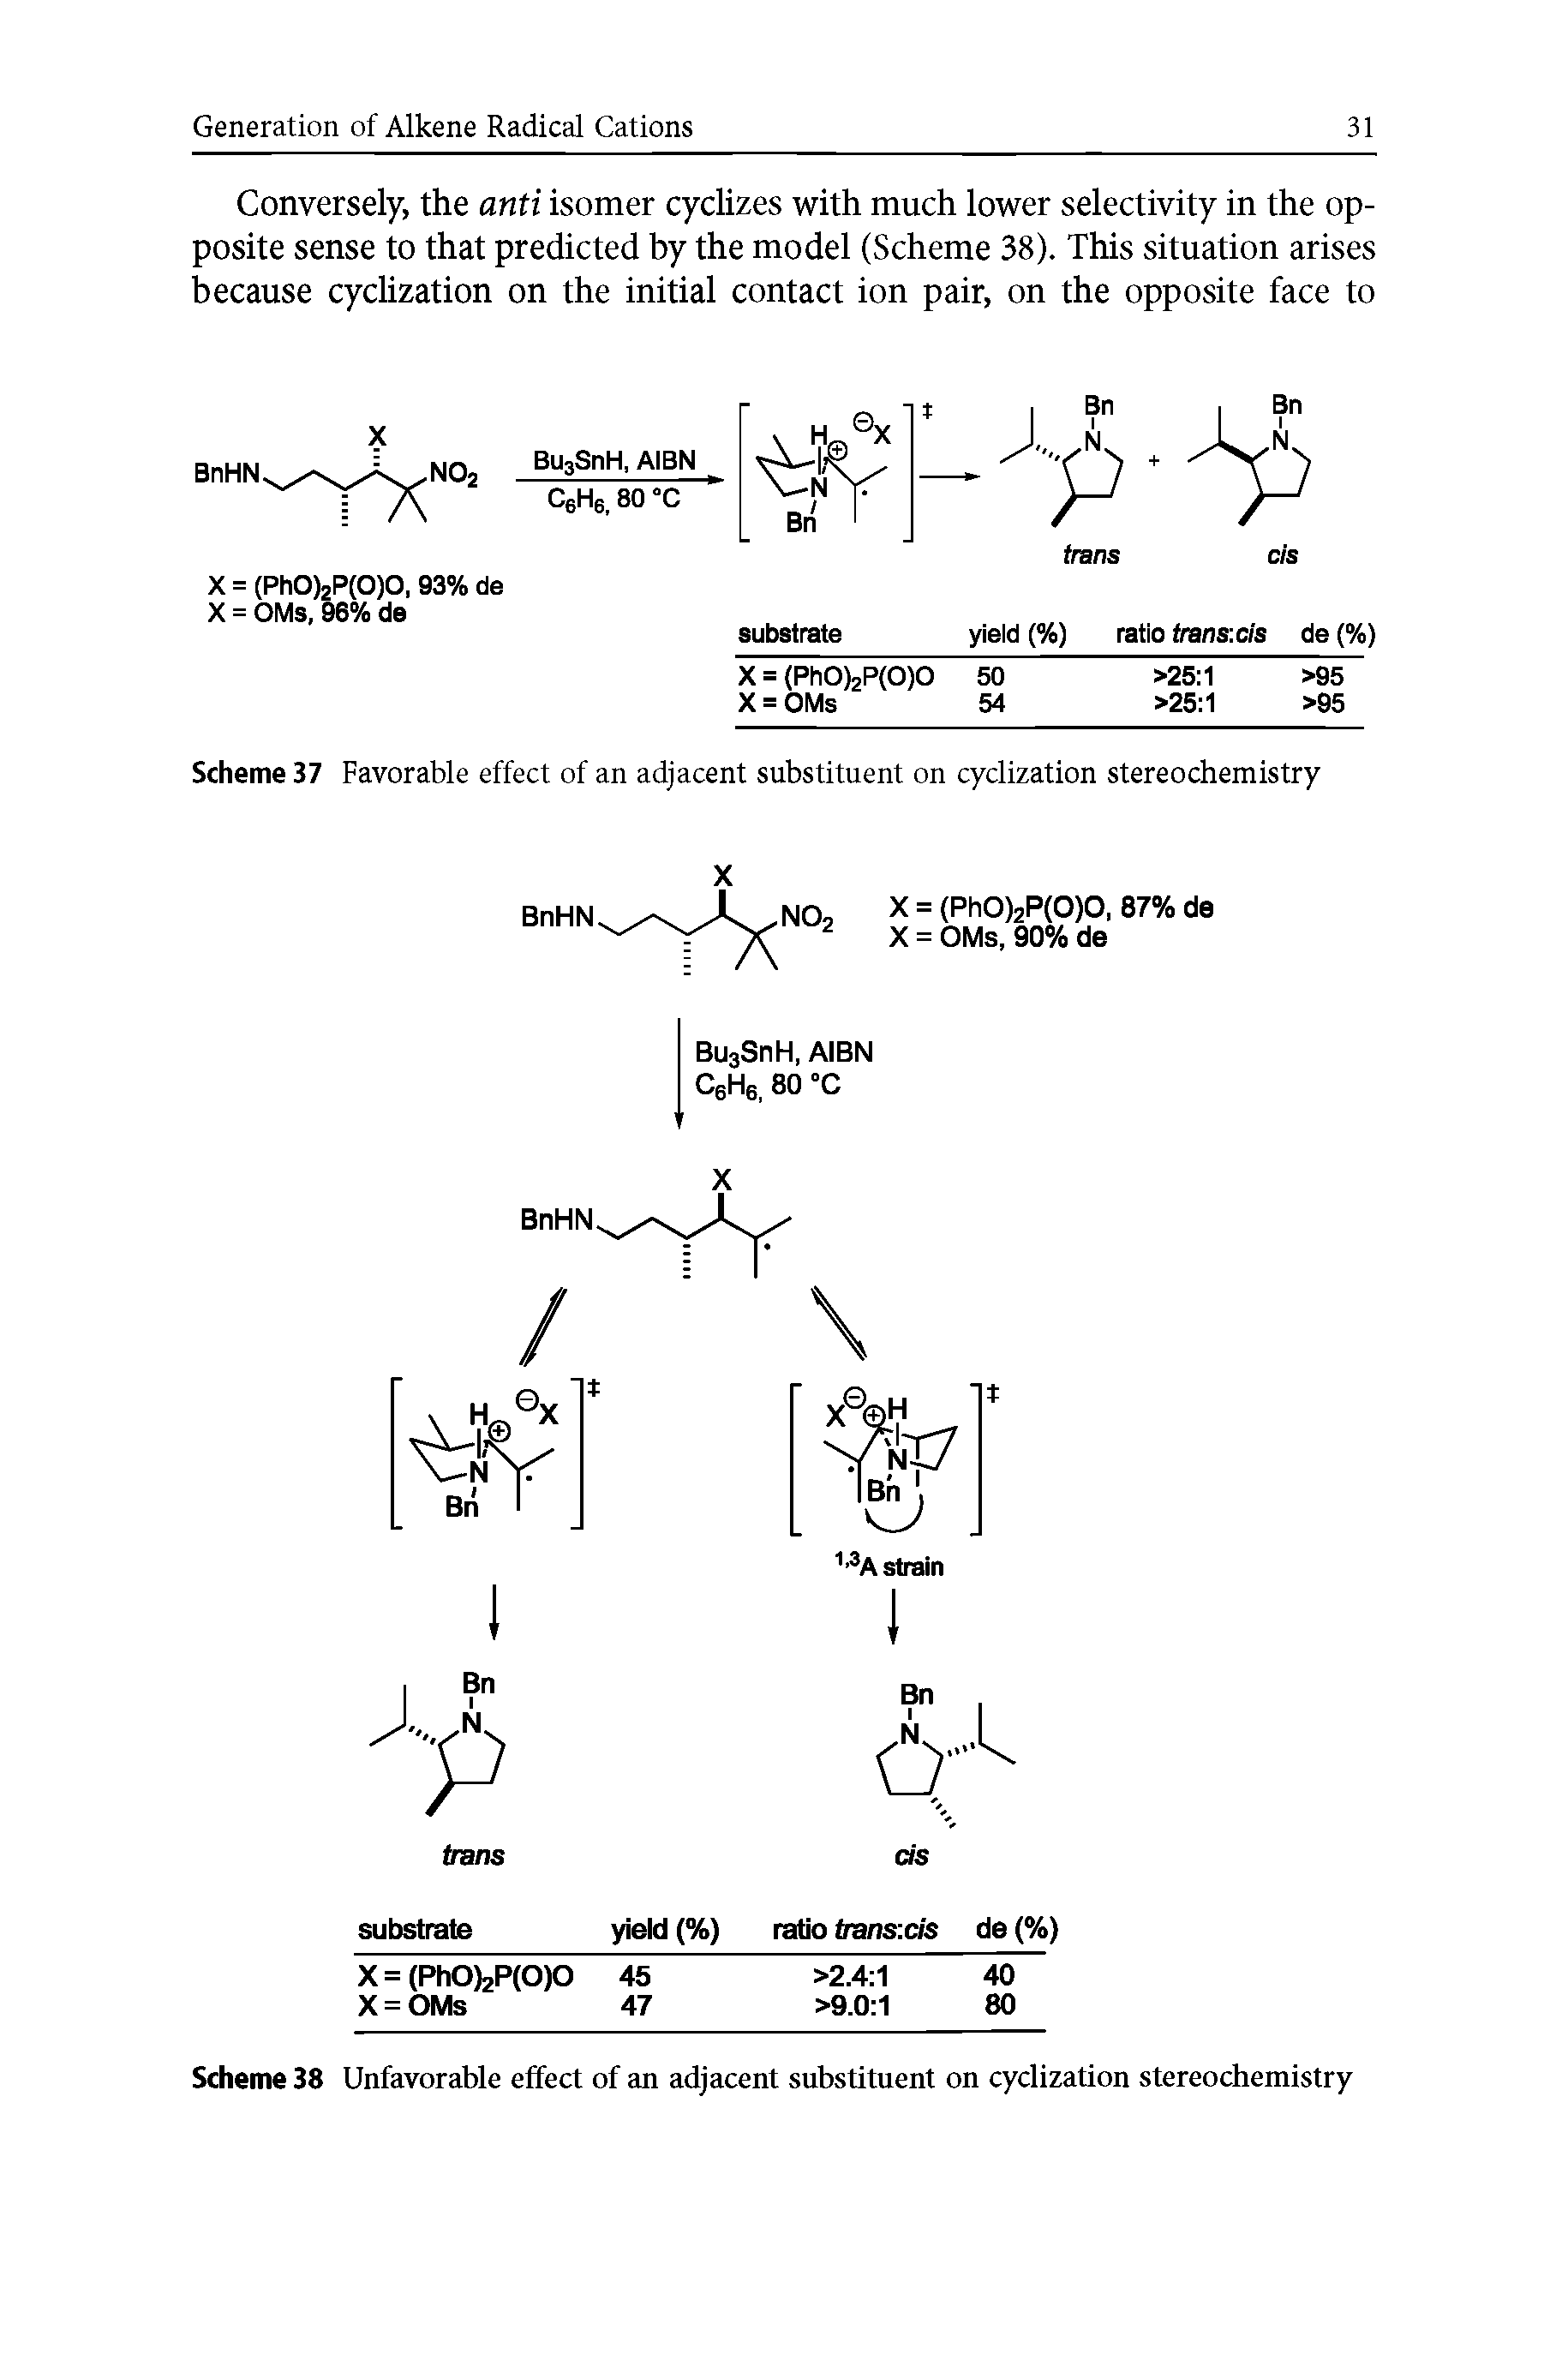 Scheme 37 Favorable effect of an adjacent substituent on cyclization stereochemistry...